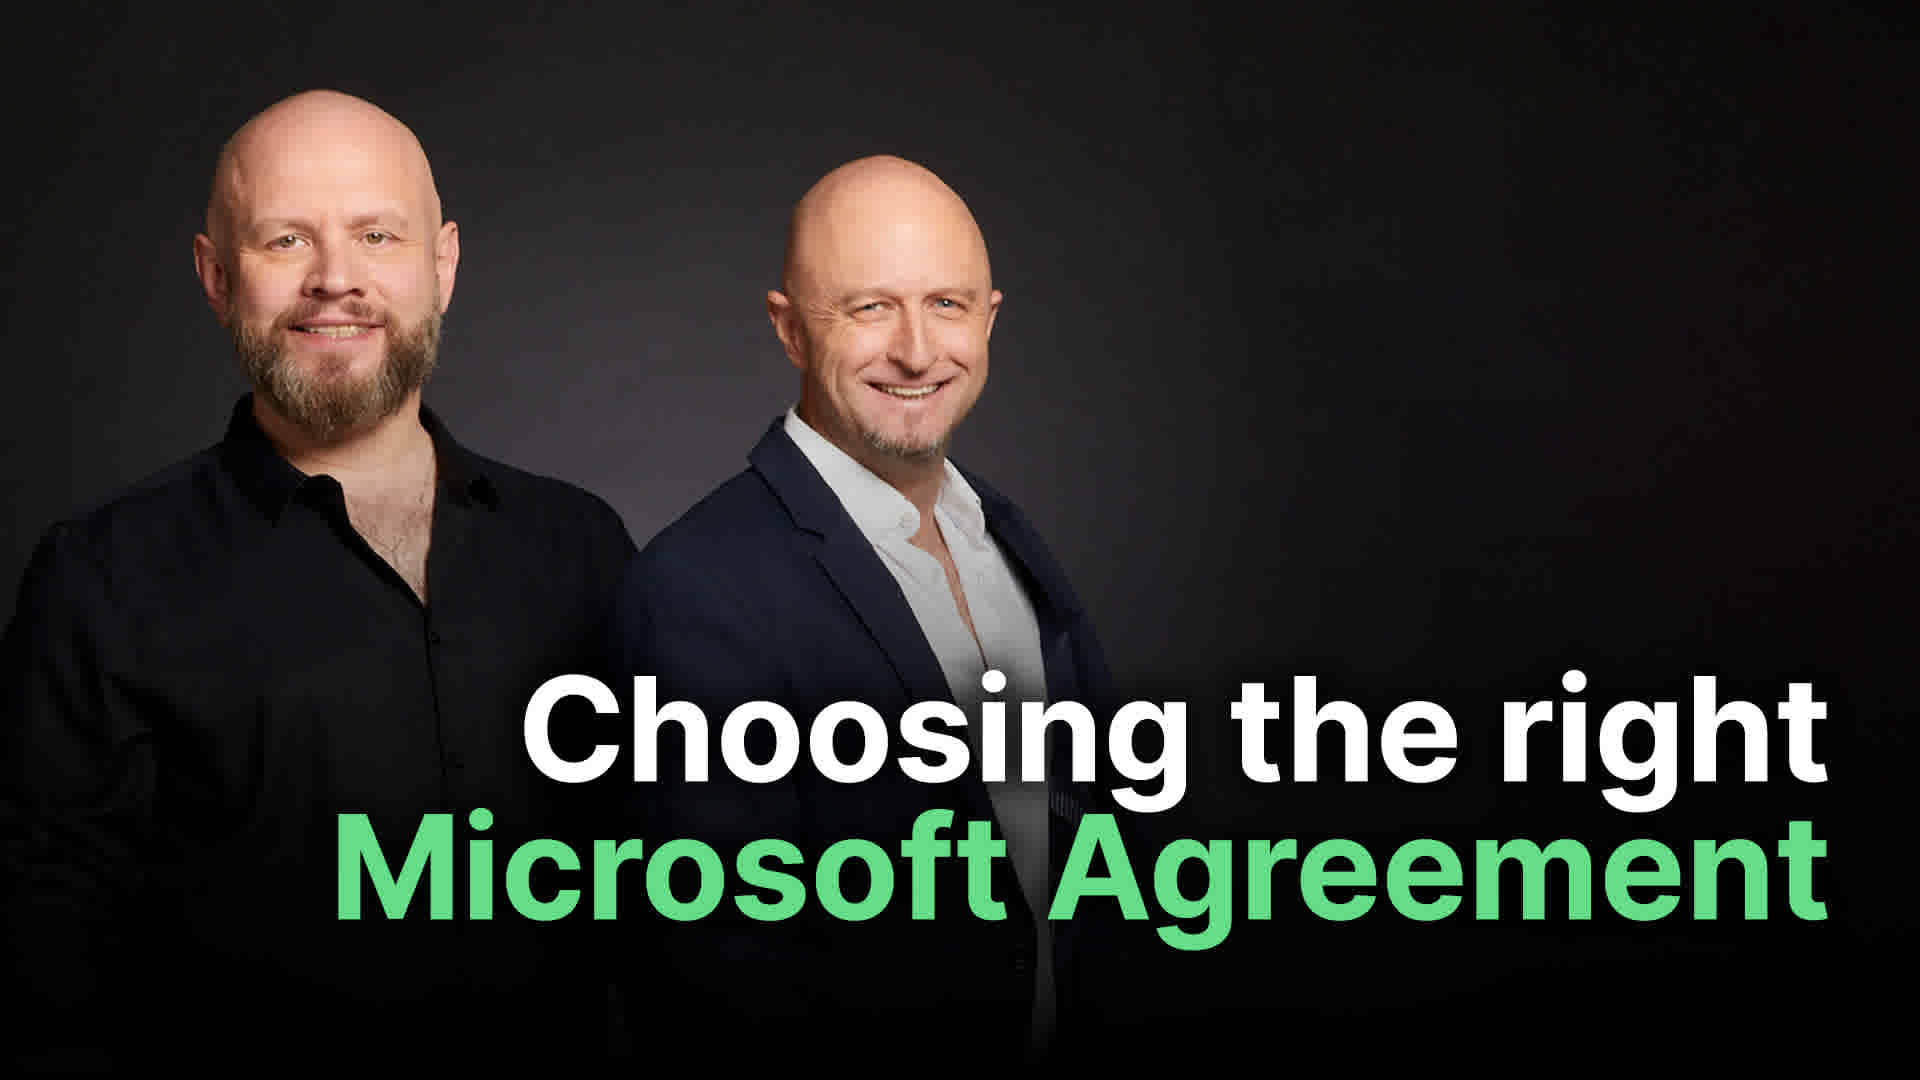 What Microsoft agreement to choose in 2024?